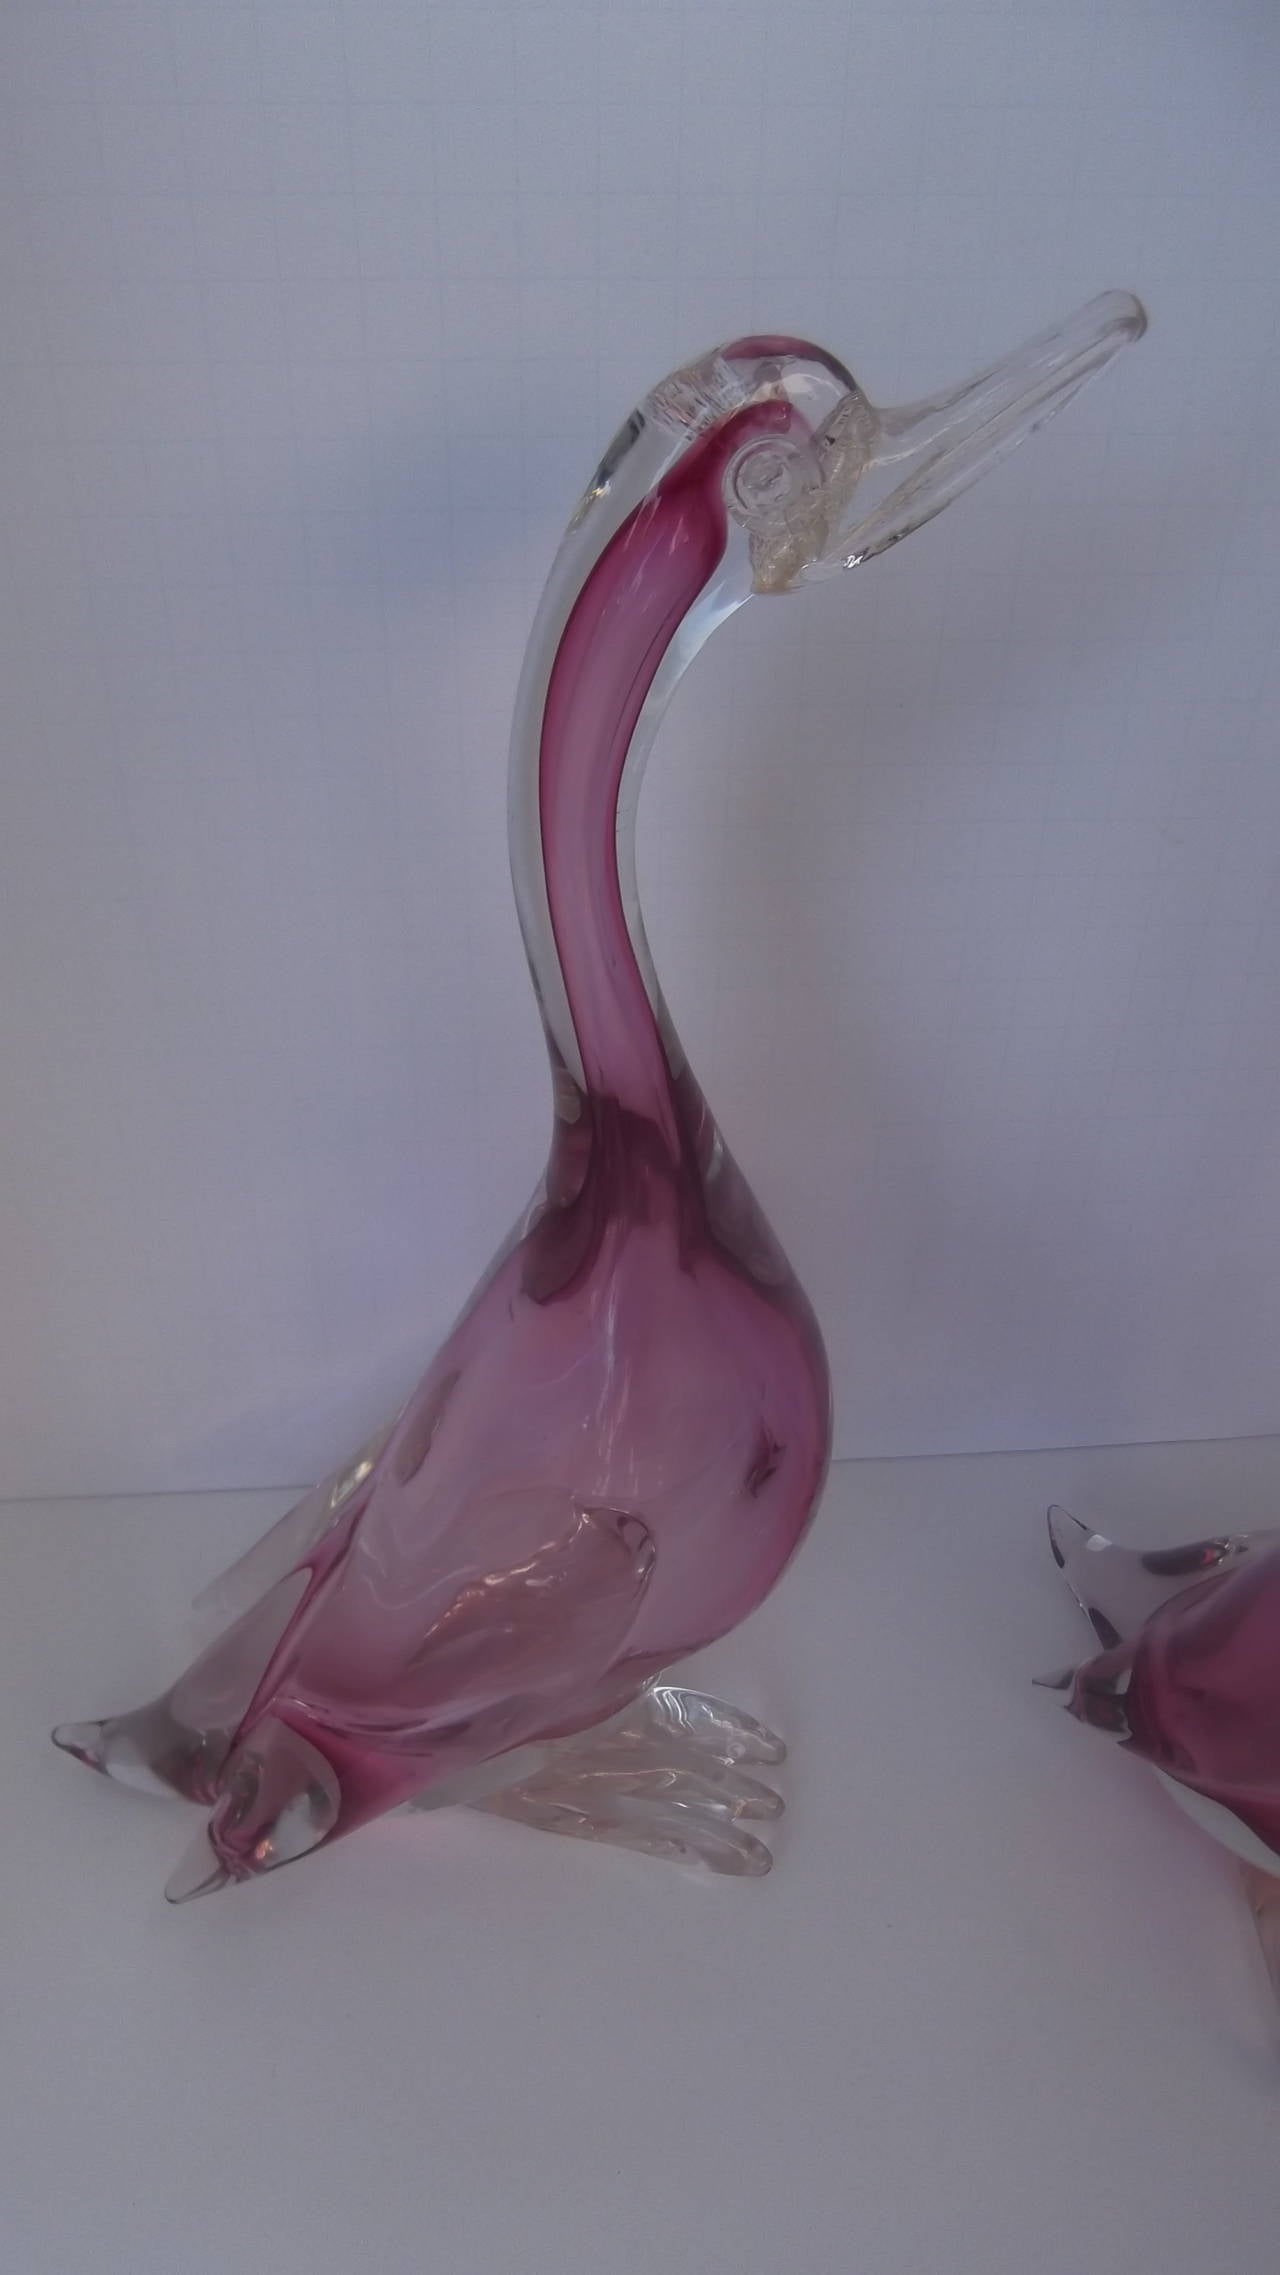 Whimsical pair of handblown Murano sommerso glass by Alfredo Barbini. The bodies are magenta with a heavy clear outer glass. The beaks and feet have gold fleck, classic to fine Murano glass.

Alfredo Barbini, a glass artist born in 1912 on the